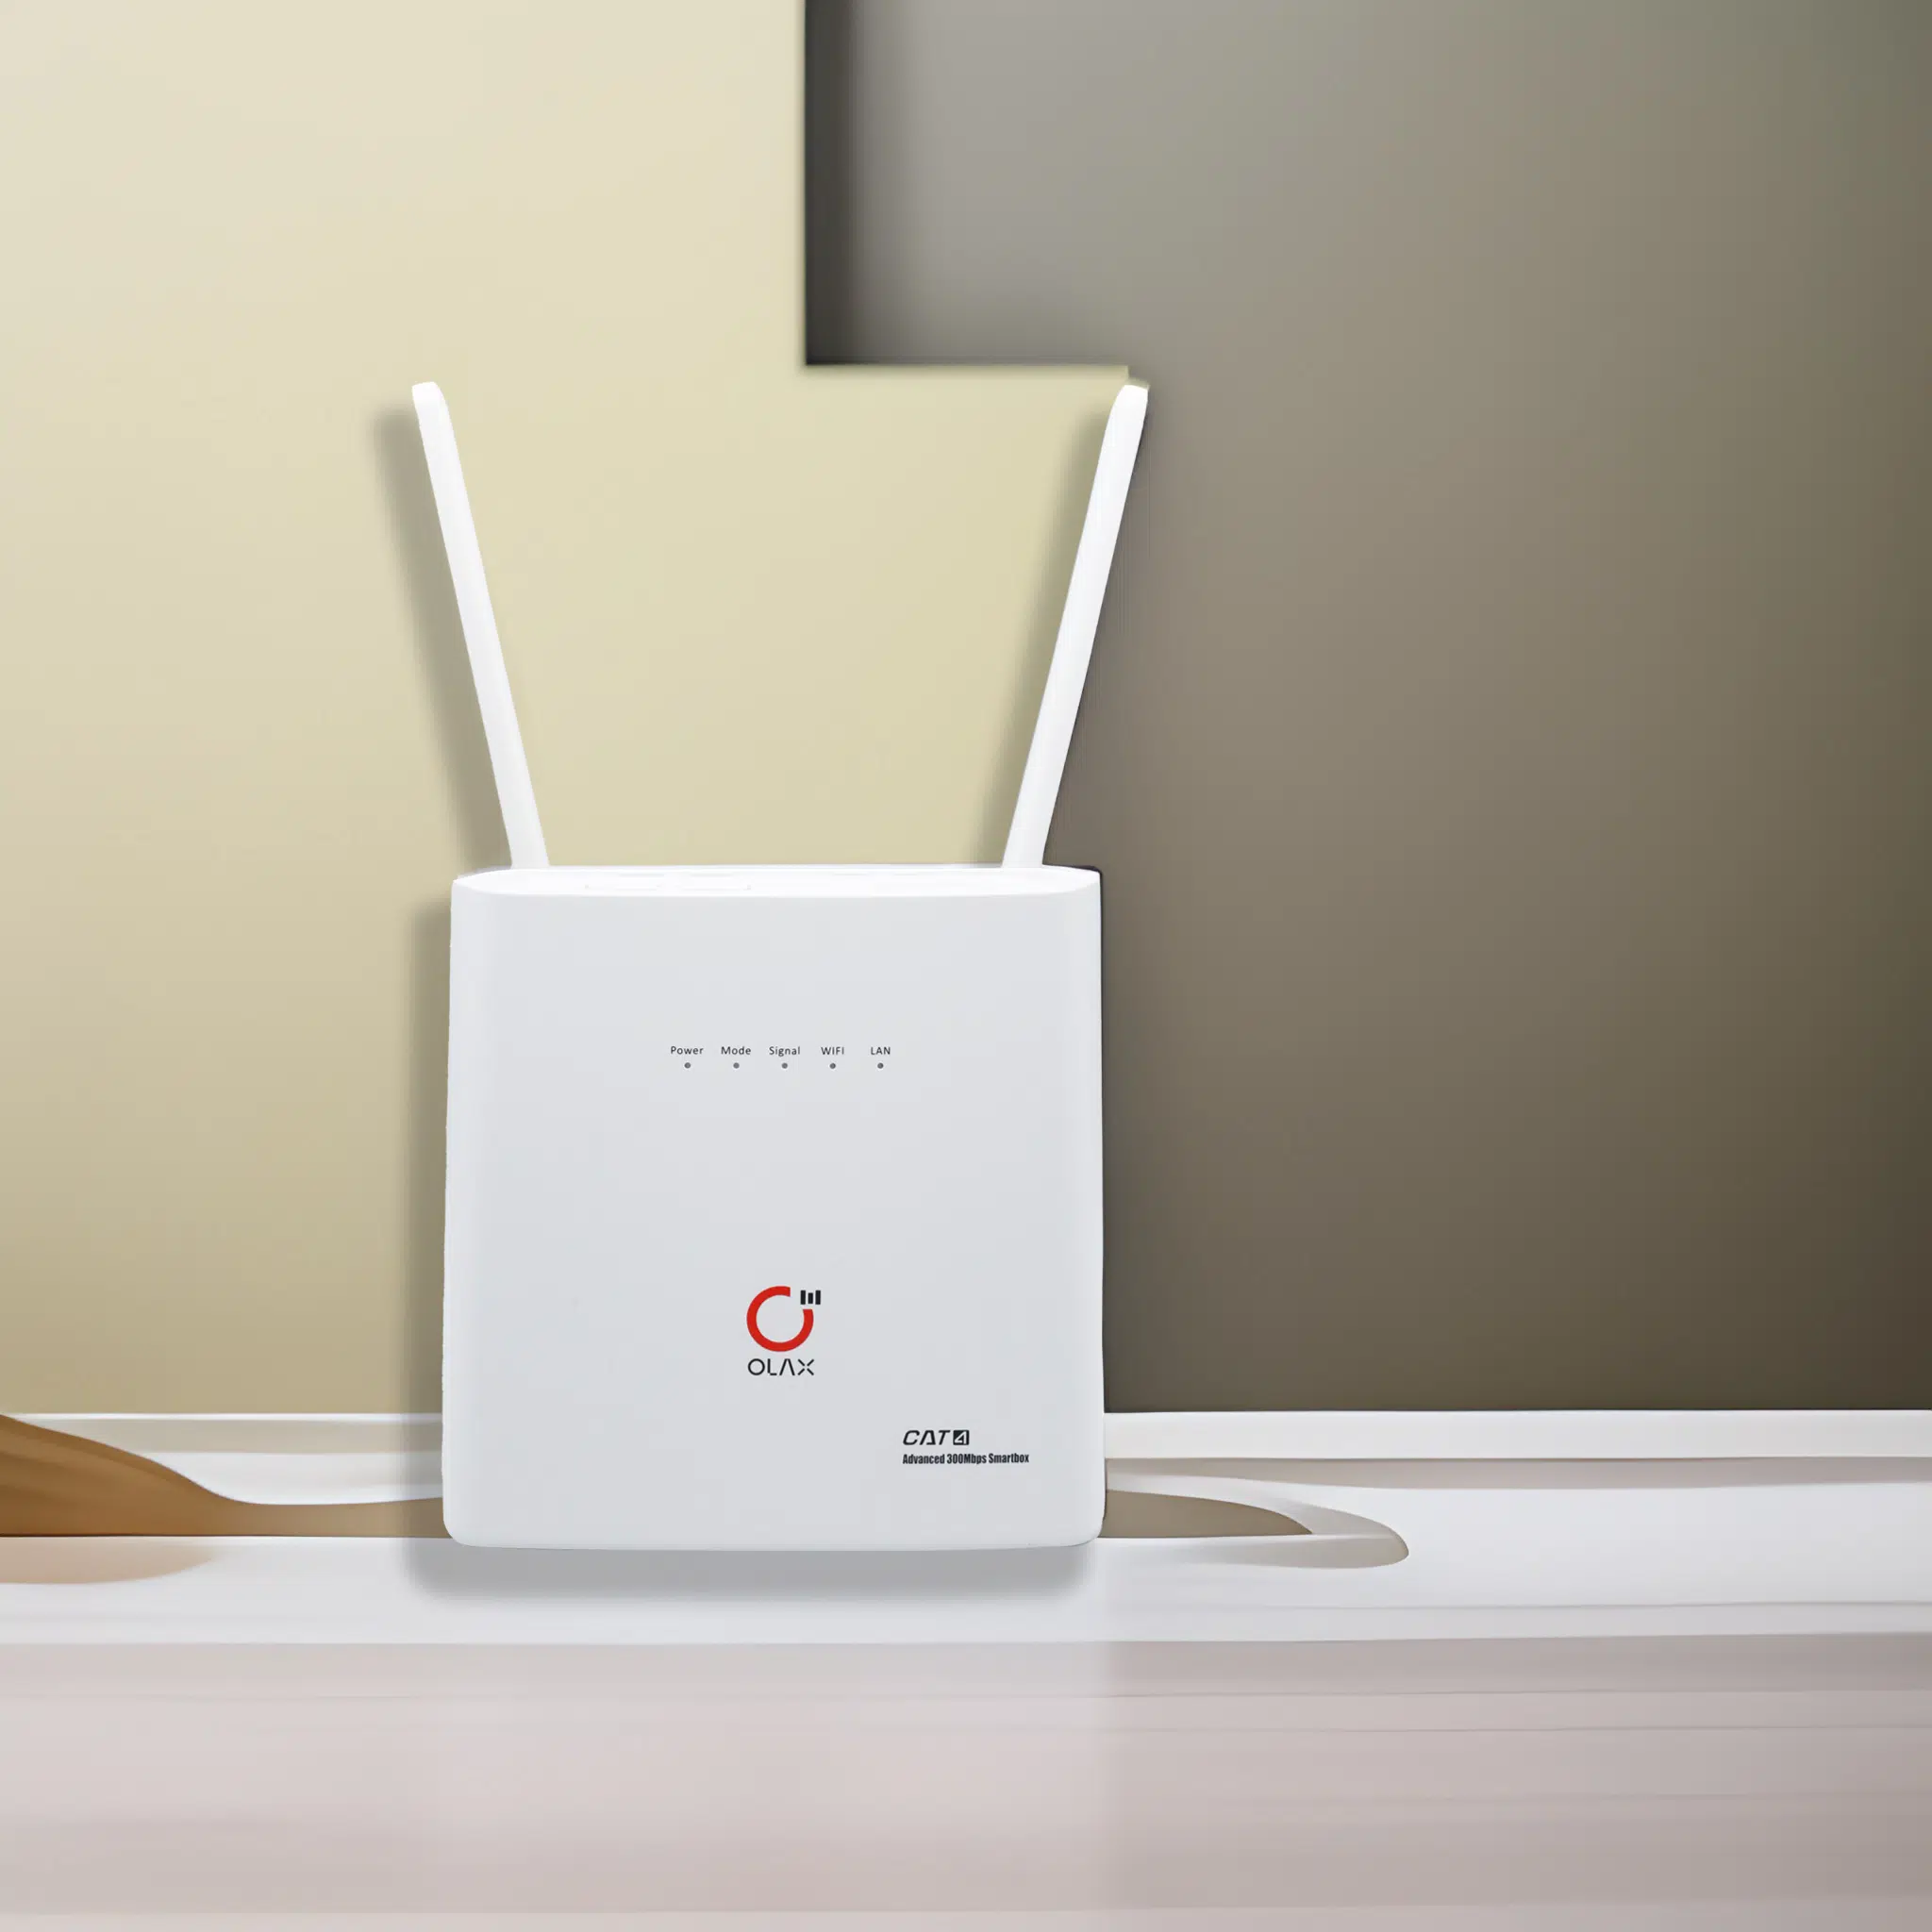 4G SIM Supported Rechargeable WiFi Router